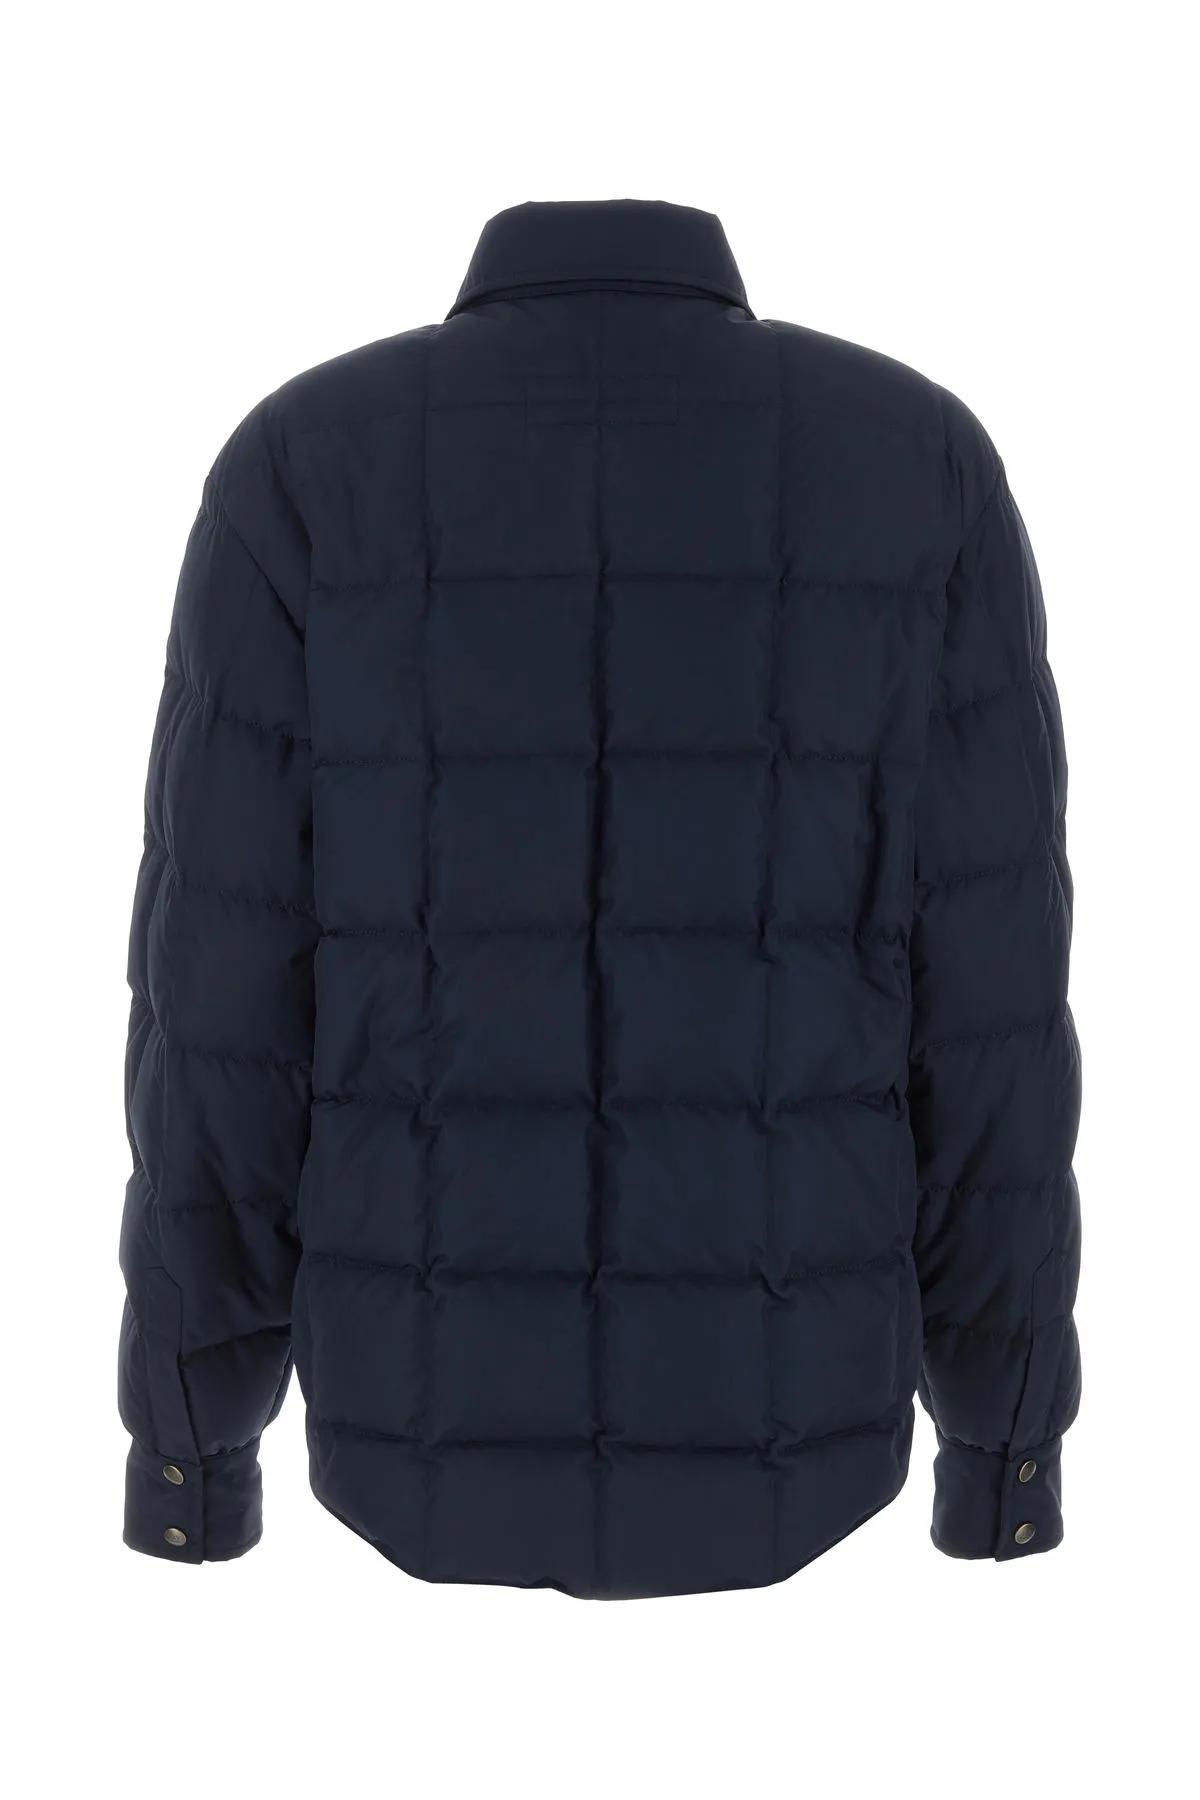 Shop Fay Navy Blue Polyester Down Jacket